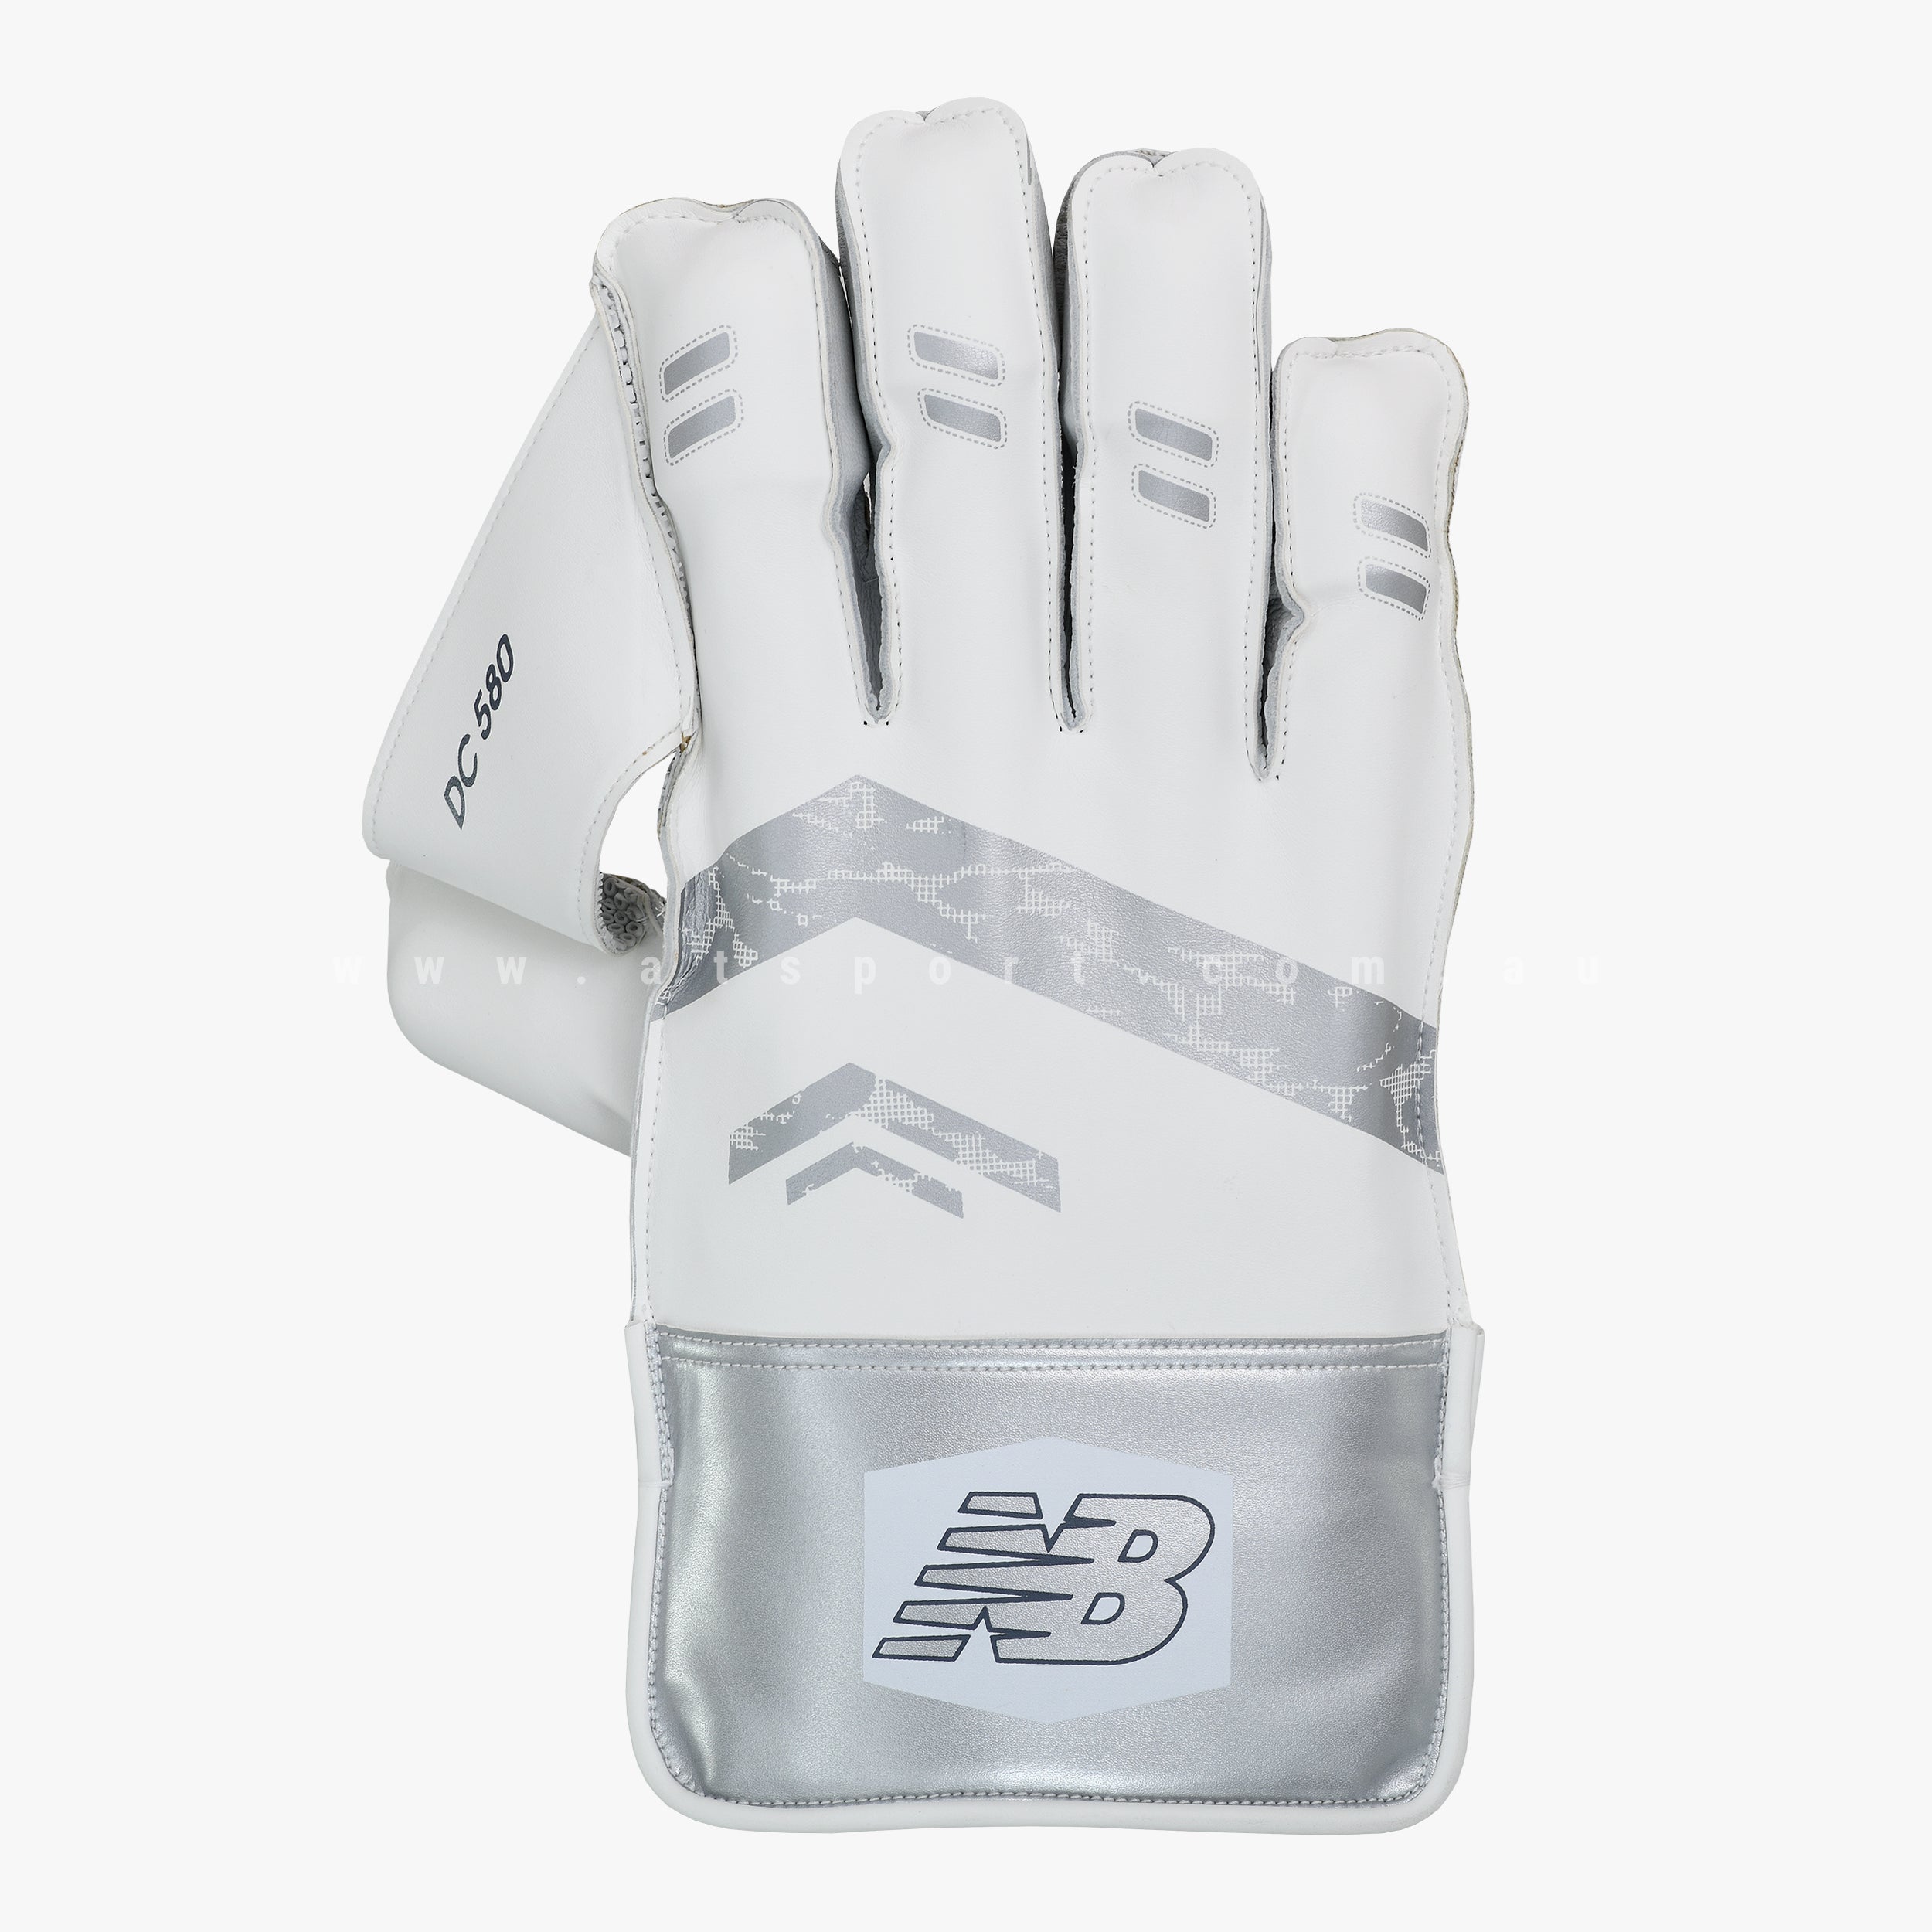 New Balance DC 580 Wicket Keeping Gloves - YOUTH